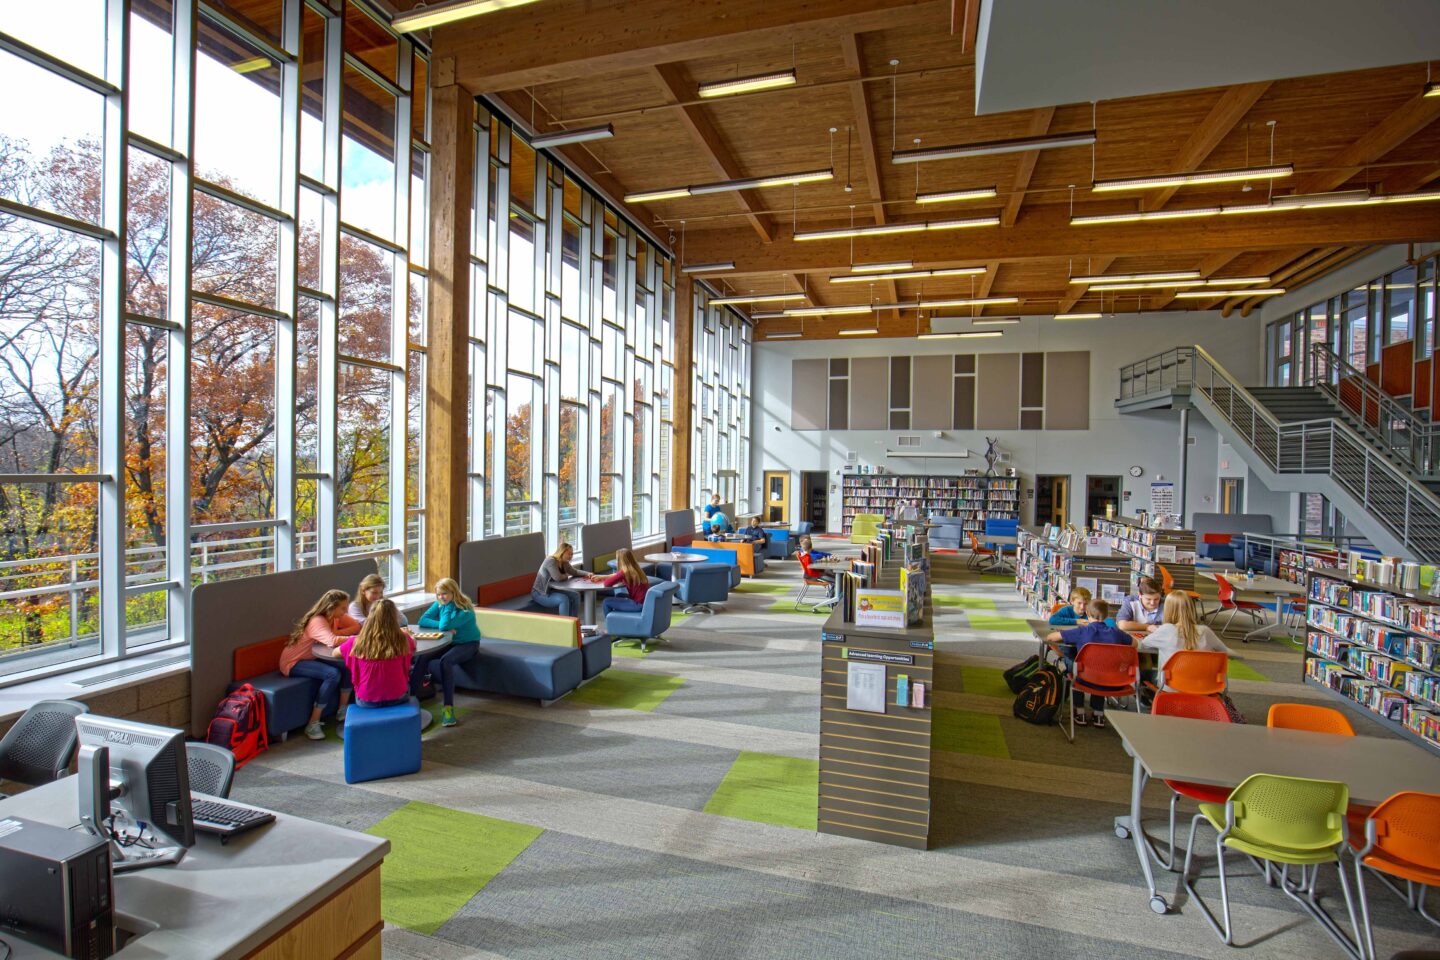 The library features large windows that overlook the nearby conservancy.